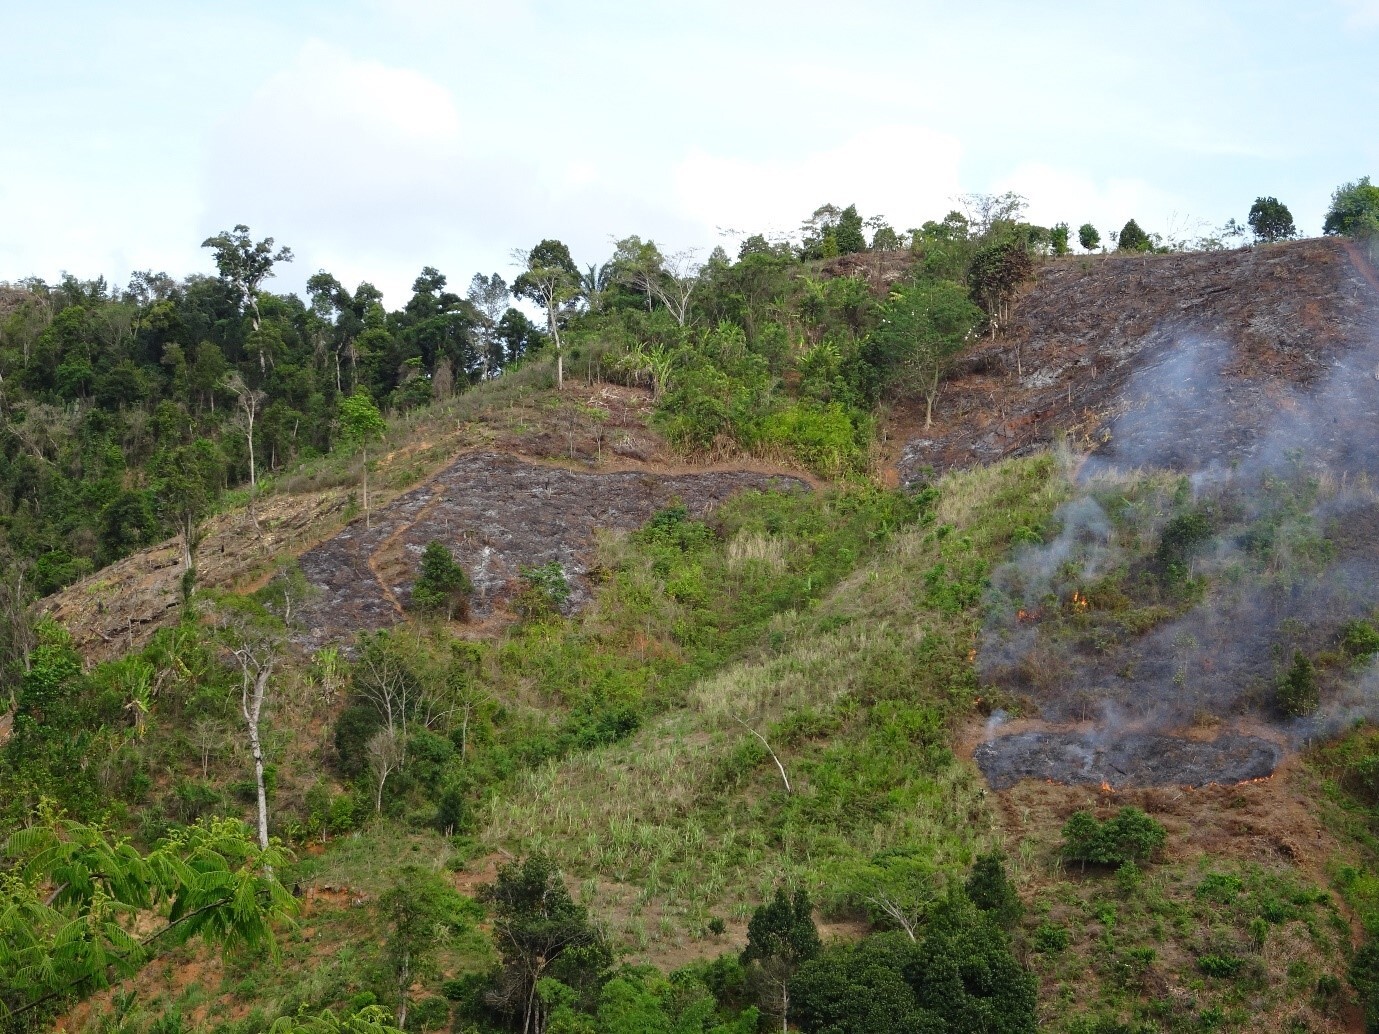 Burning the fields for rice cultivation is the main reason for forest loss in northeastern Madagascar. Vanilla agroforests established on already deforested land could provide a sustainable alternative.